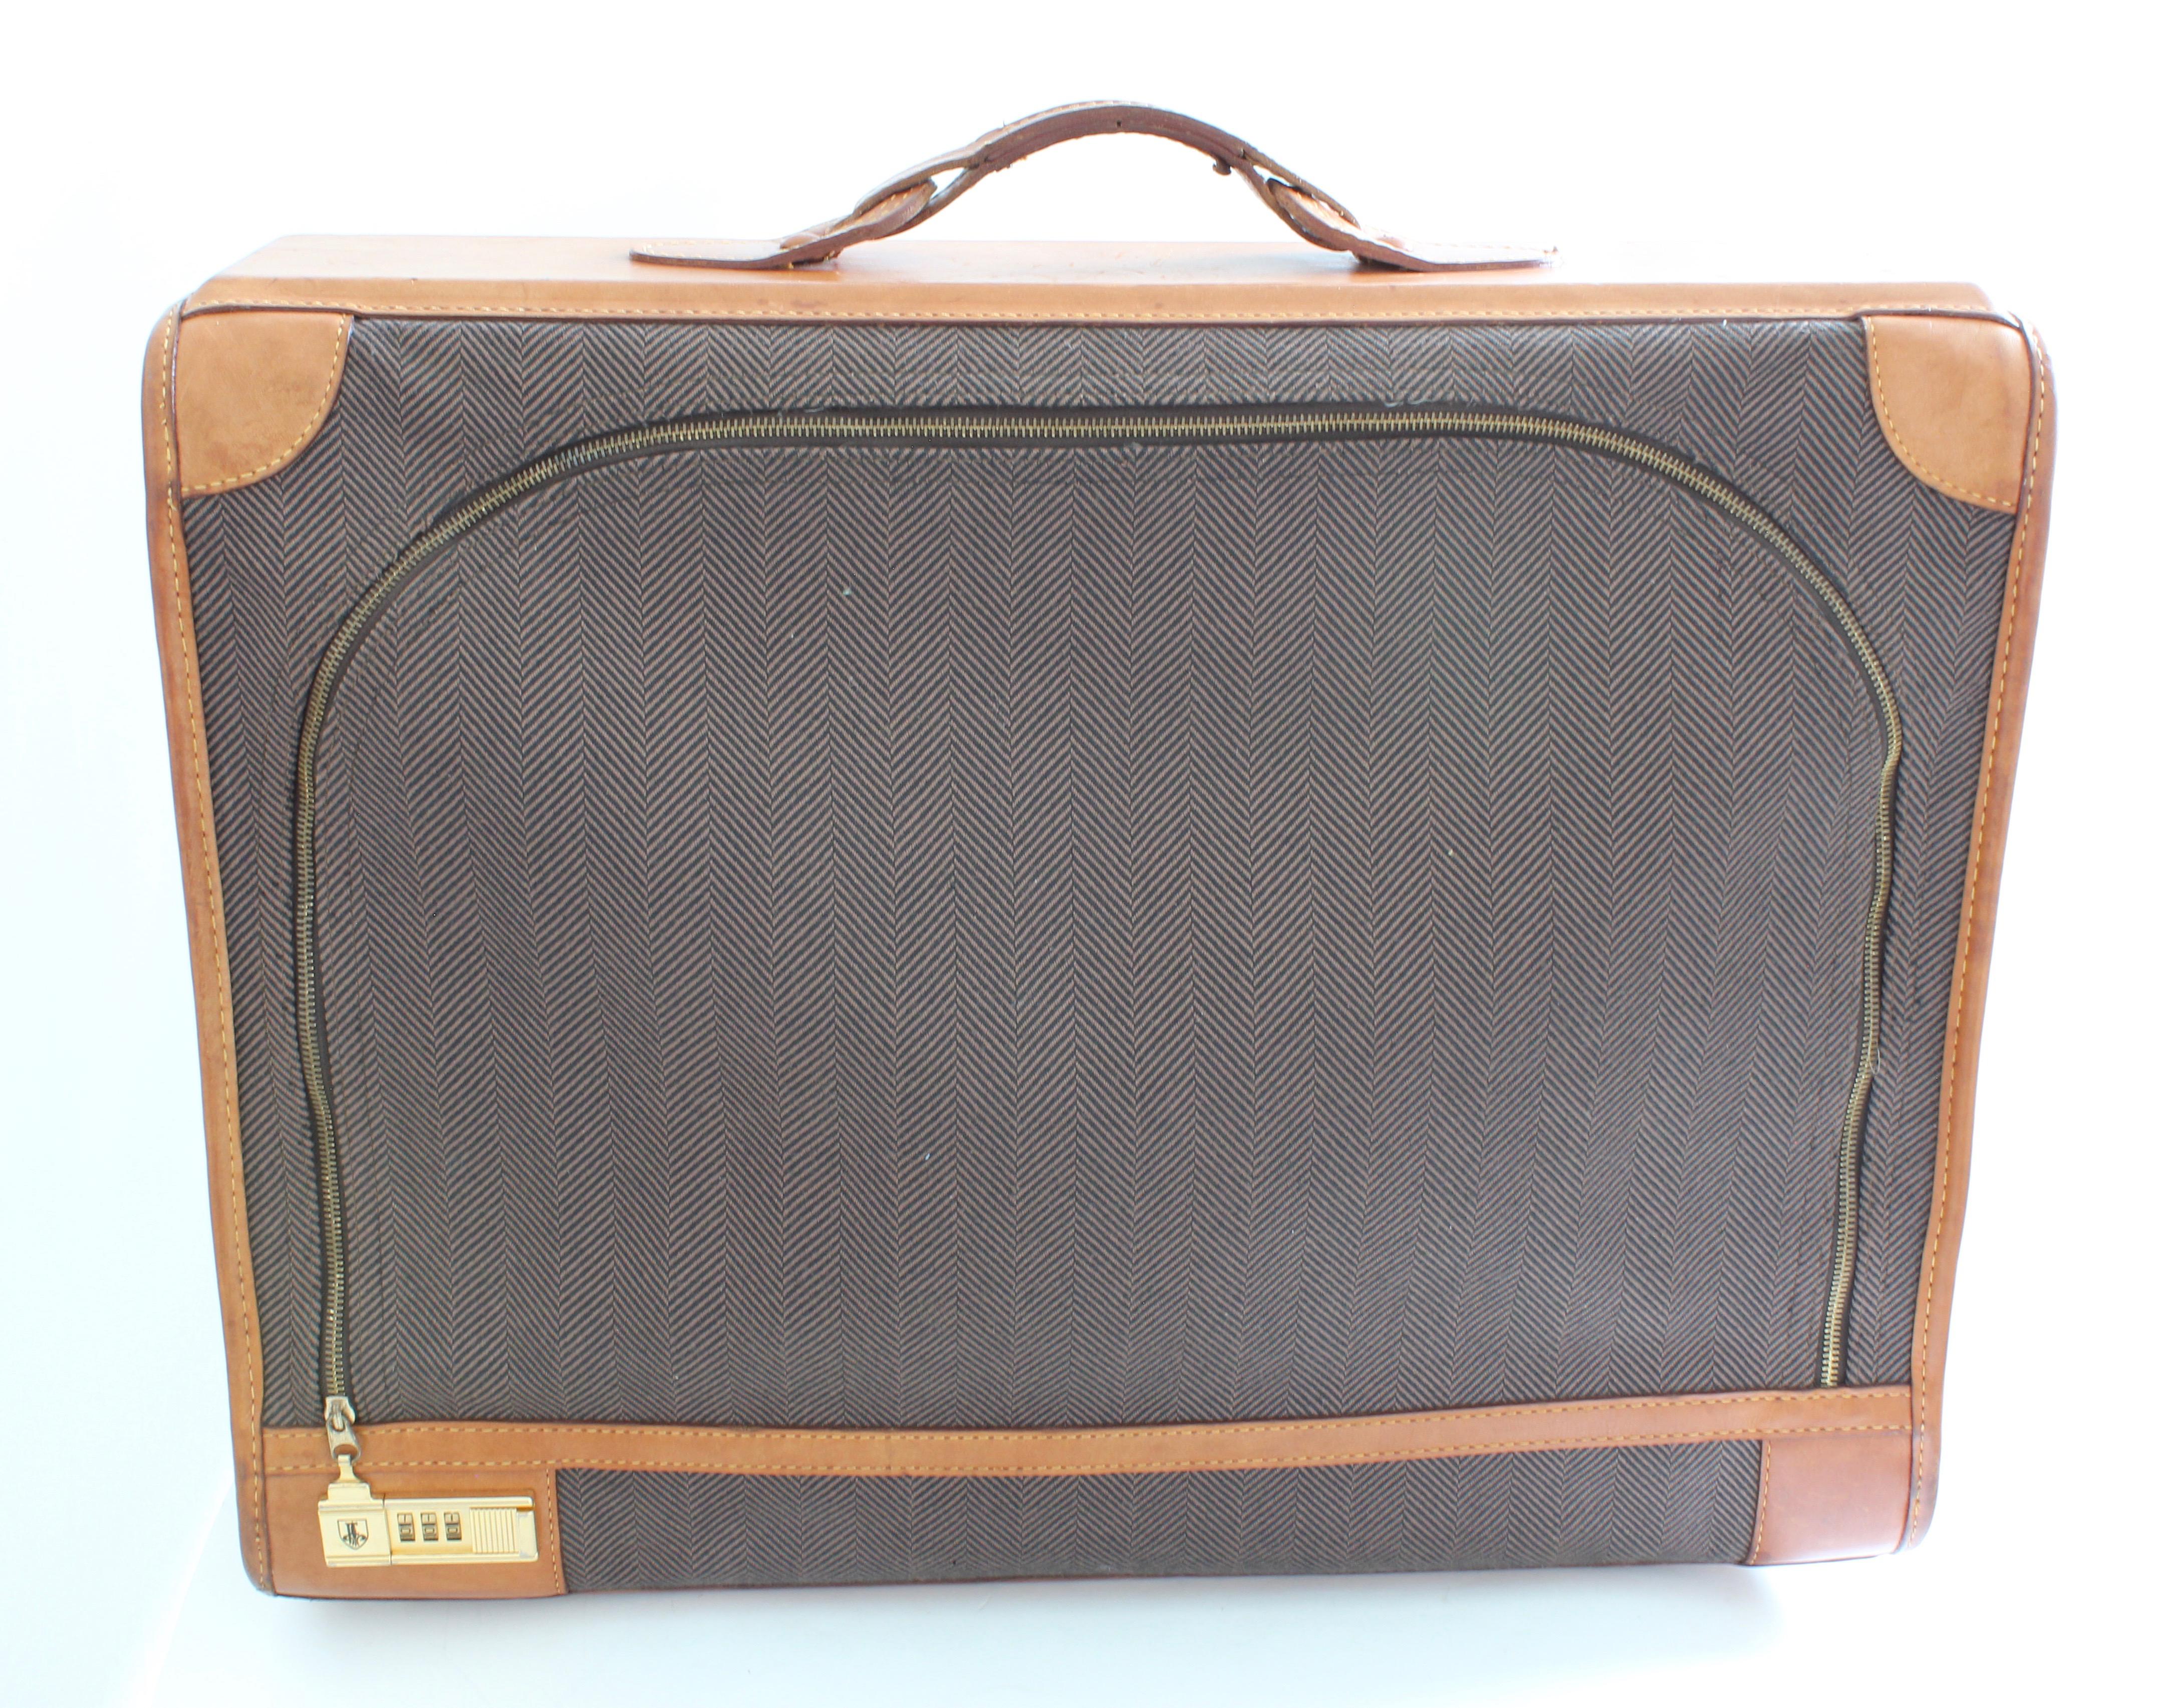 Here's a hard to find vintage suitcase by The French Luggage Company, manufacturers of high-end luxury travel bags (they were even selected to manufacture bags for Louis Vuitton under special license from the early 70s through the early 90s).  Made